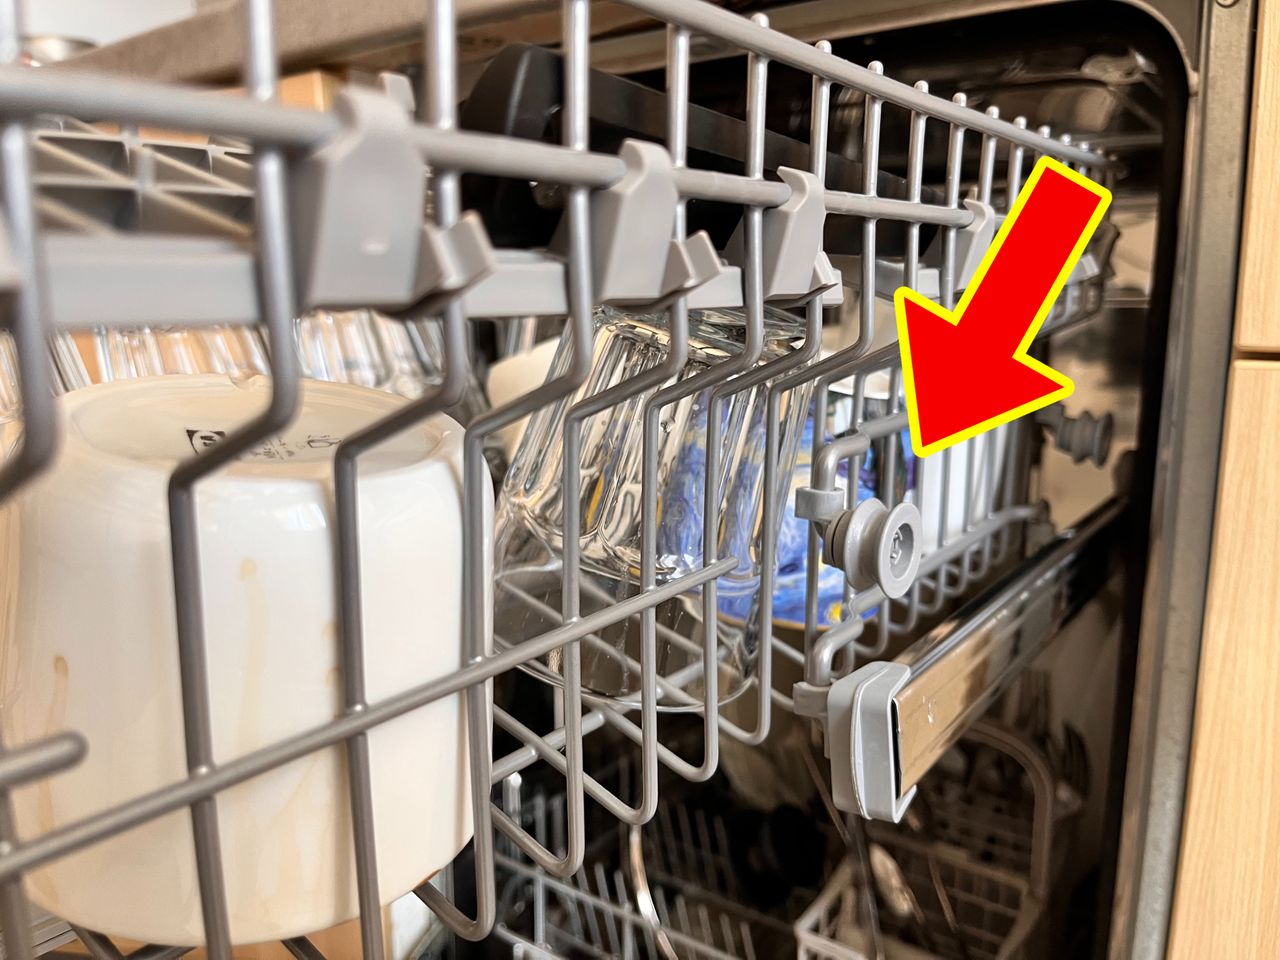 Say goodbye to wet dishes with this dishwasher hack